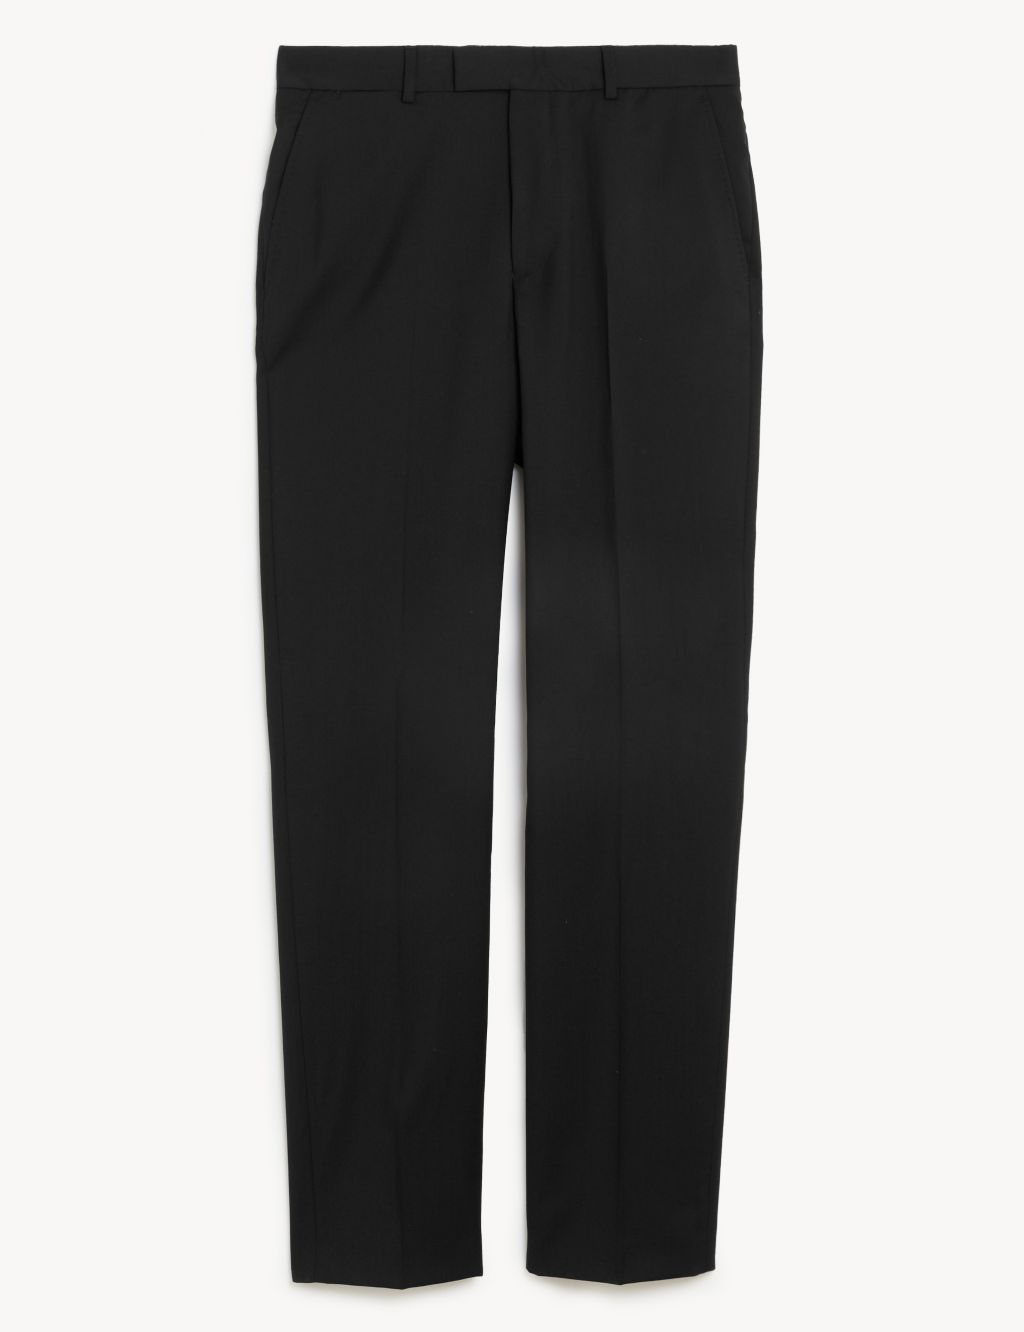 Tailored Fit Pure Wool Twill Trousers image 1